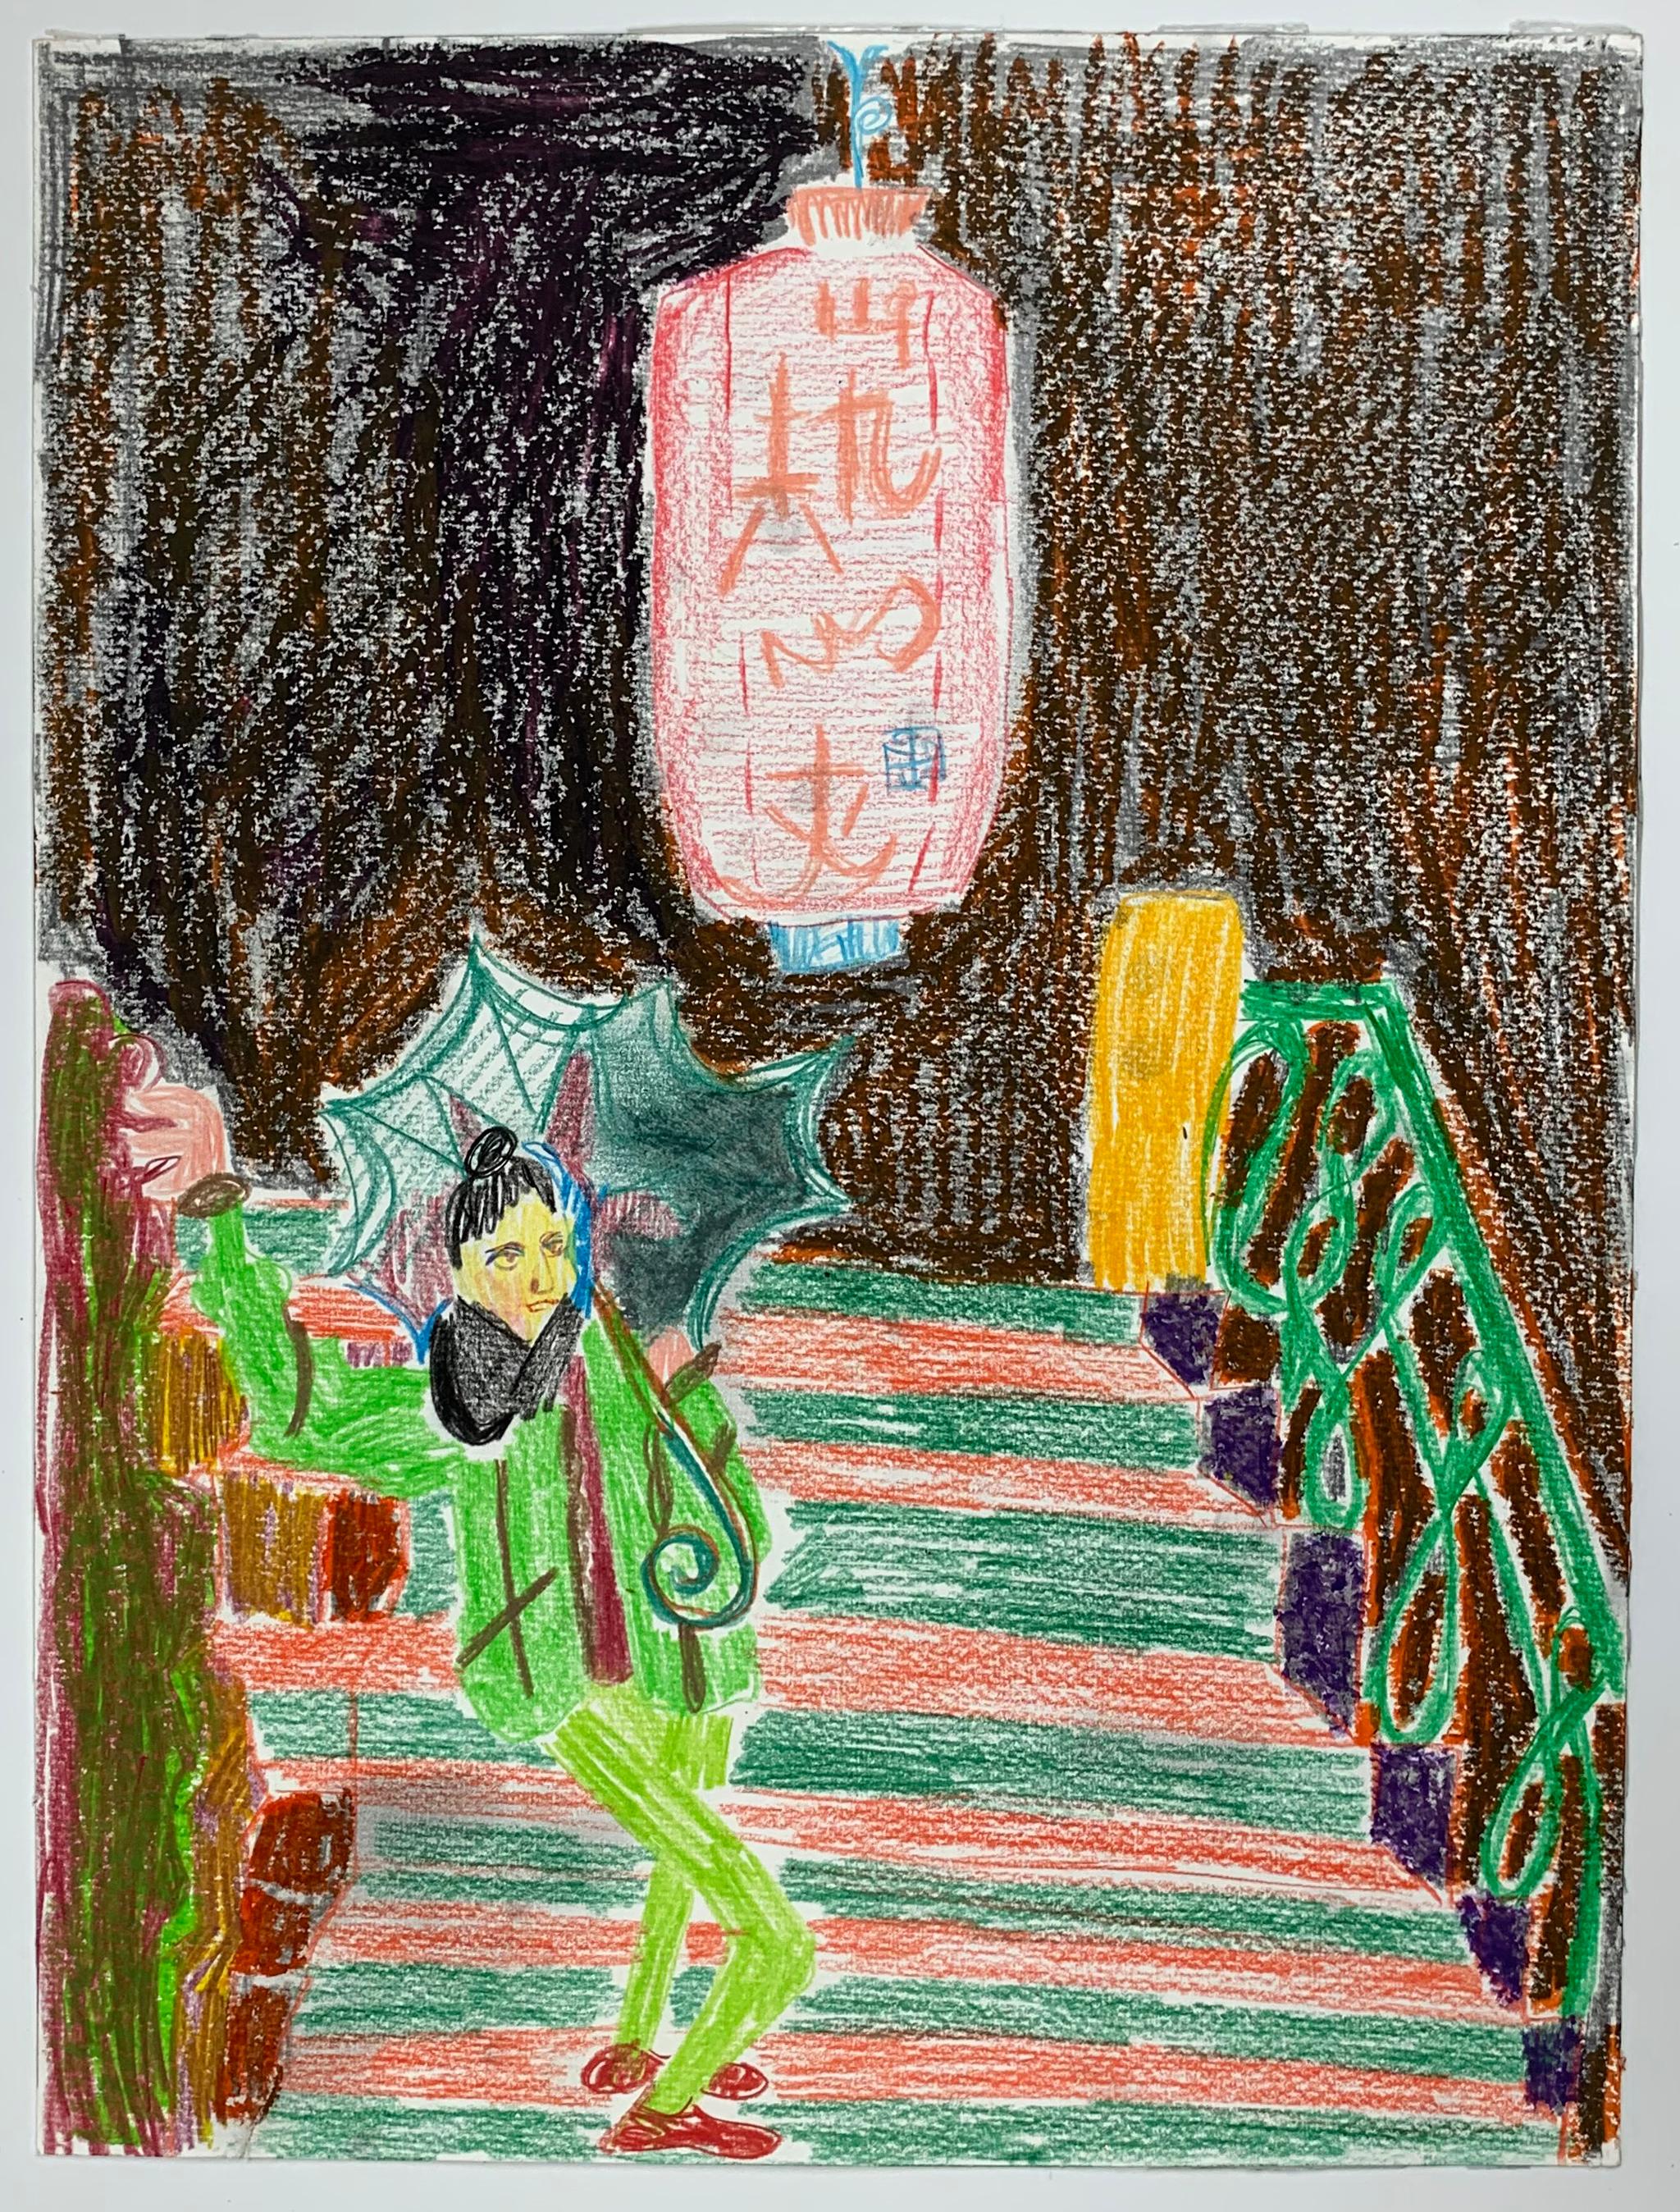 A self-portrait of the artist in Tokyo. She is standing on stairs with a typical asian umbrella and above her is a lamp with signs. The drawing is made with pastel and pencil and is unique. 

Tanja Ritterbex has been called the Lady Gaga of